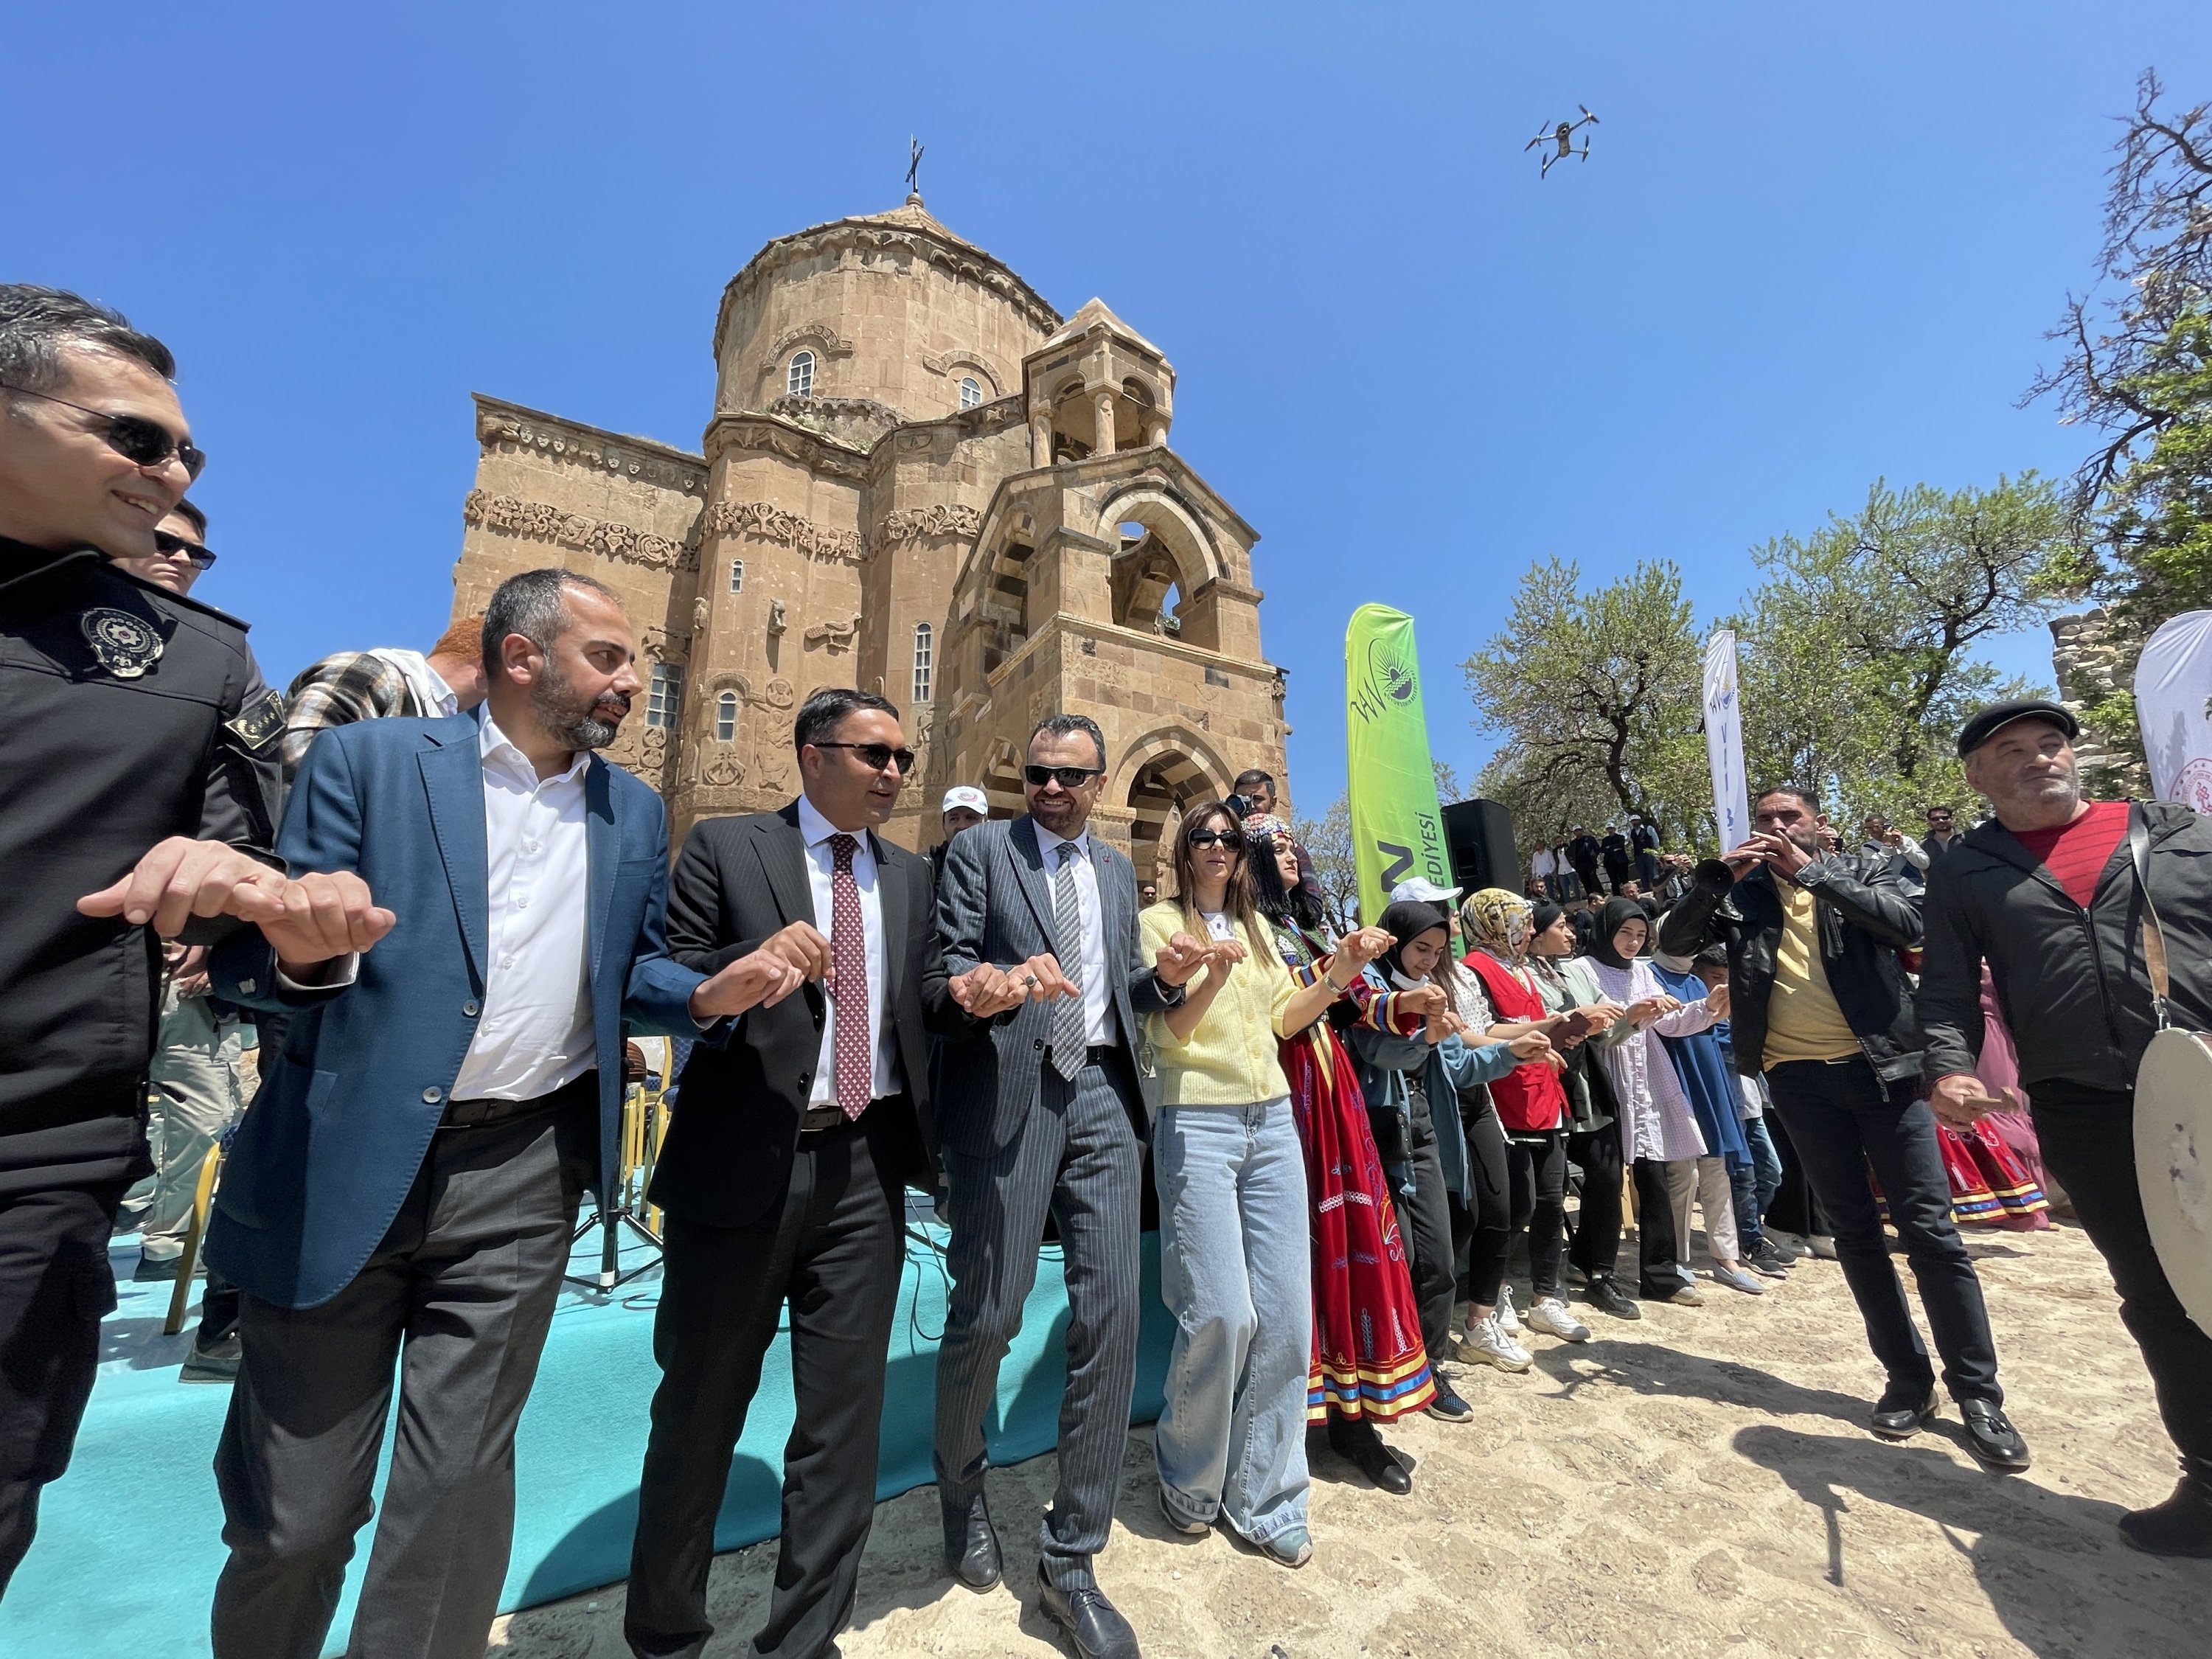 Organized by the Provincial Directorate of Culture and Tourism of Van on Akdamar Island in the Gevaş district of Van, the 